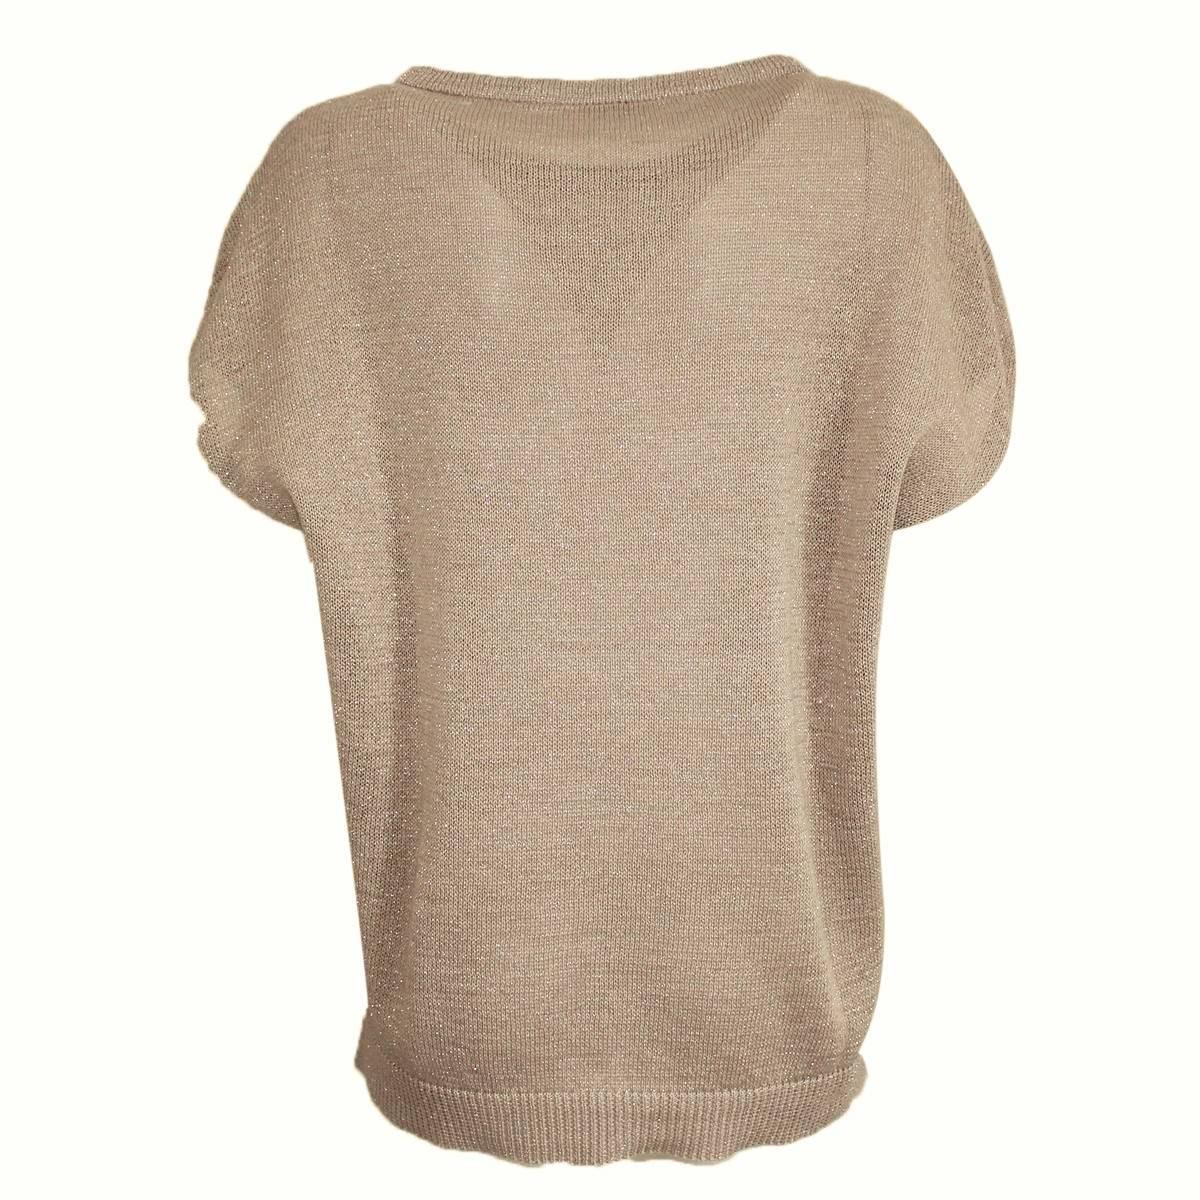 Beautiful and top quality Brunello Cucinelli sweater
Cotton with lamé
Ecru colour
Short sleeve
Crew-neck
Size M 
Made in Italy
Worldwide express shipping included in the price !